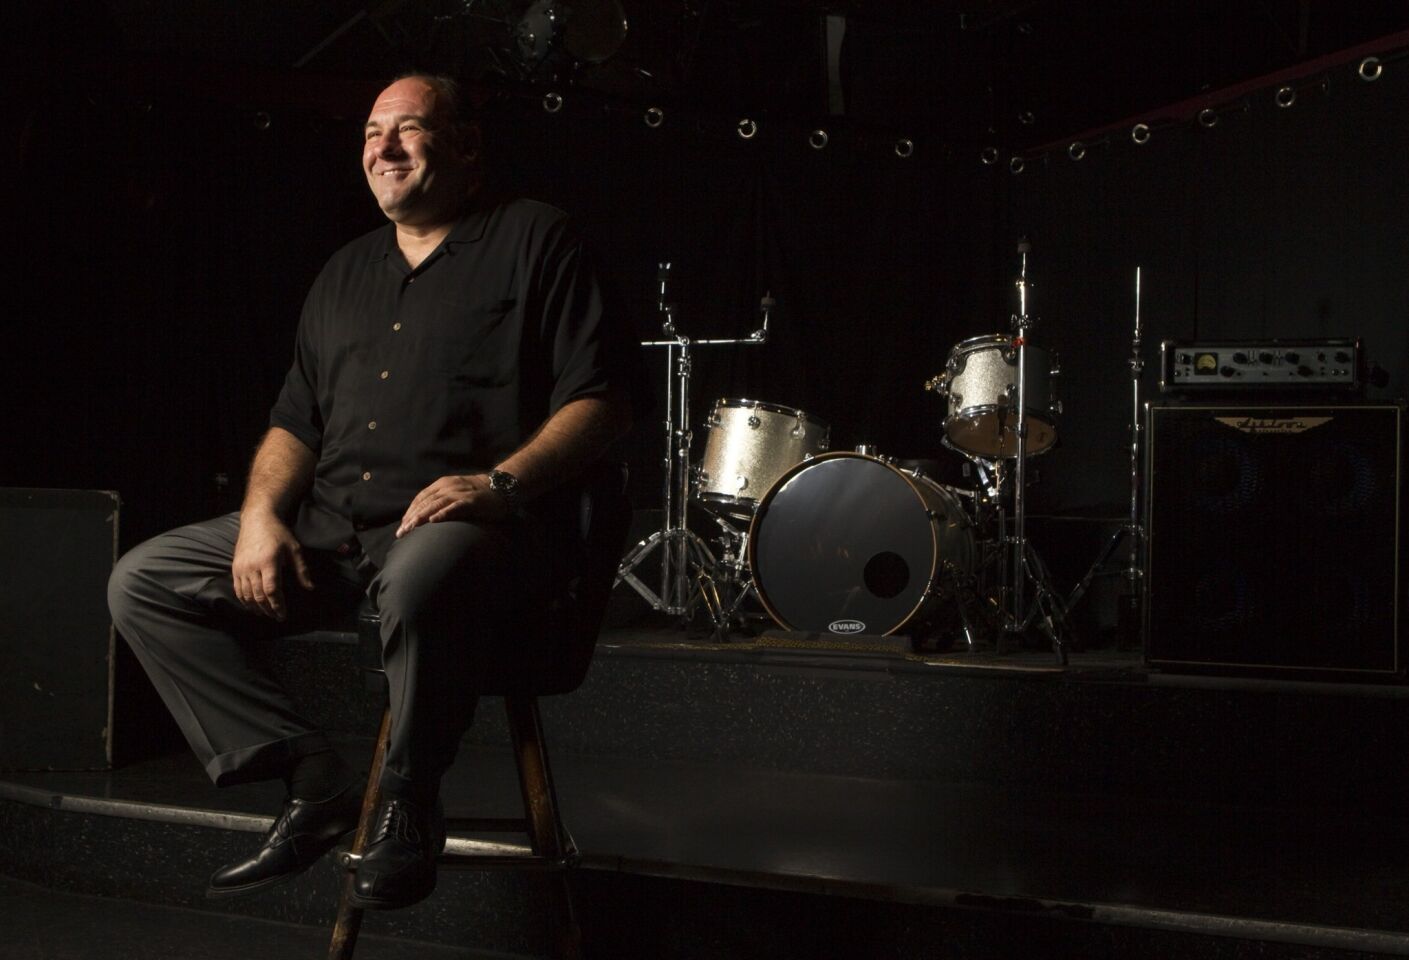 James Gandolfini at the Roxy. The veteran TV, film and stage actor died at age 51.